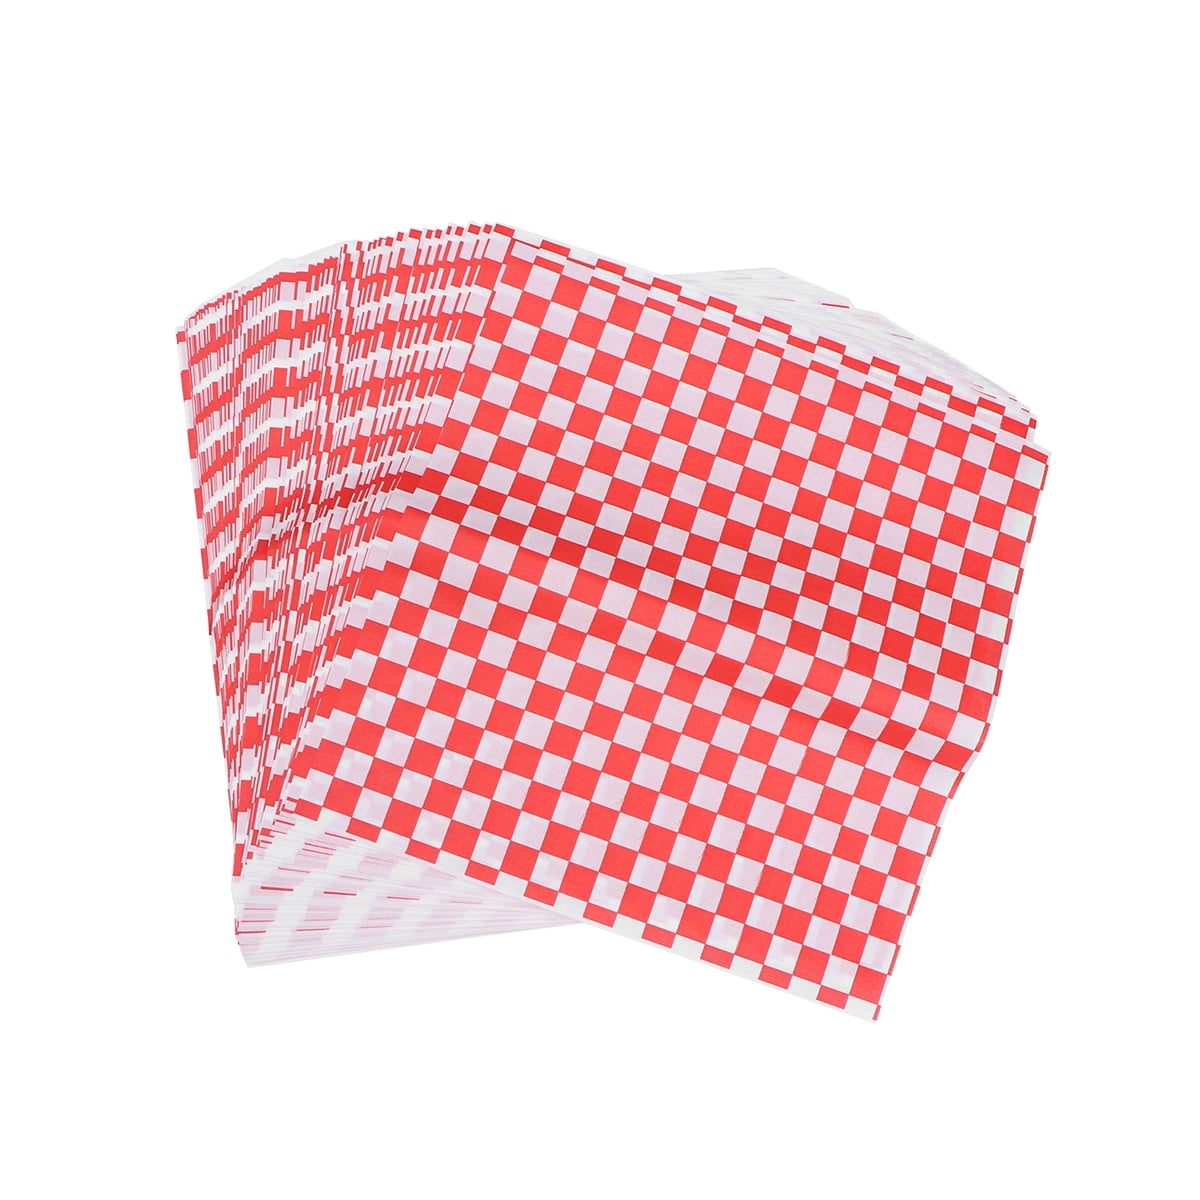 HAPPY FINDING 100 Sheets Food Grade Wrap Paper Checkered Basket Liners Oil-Proof 